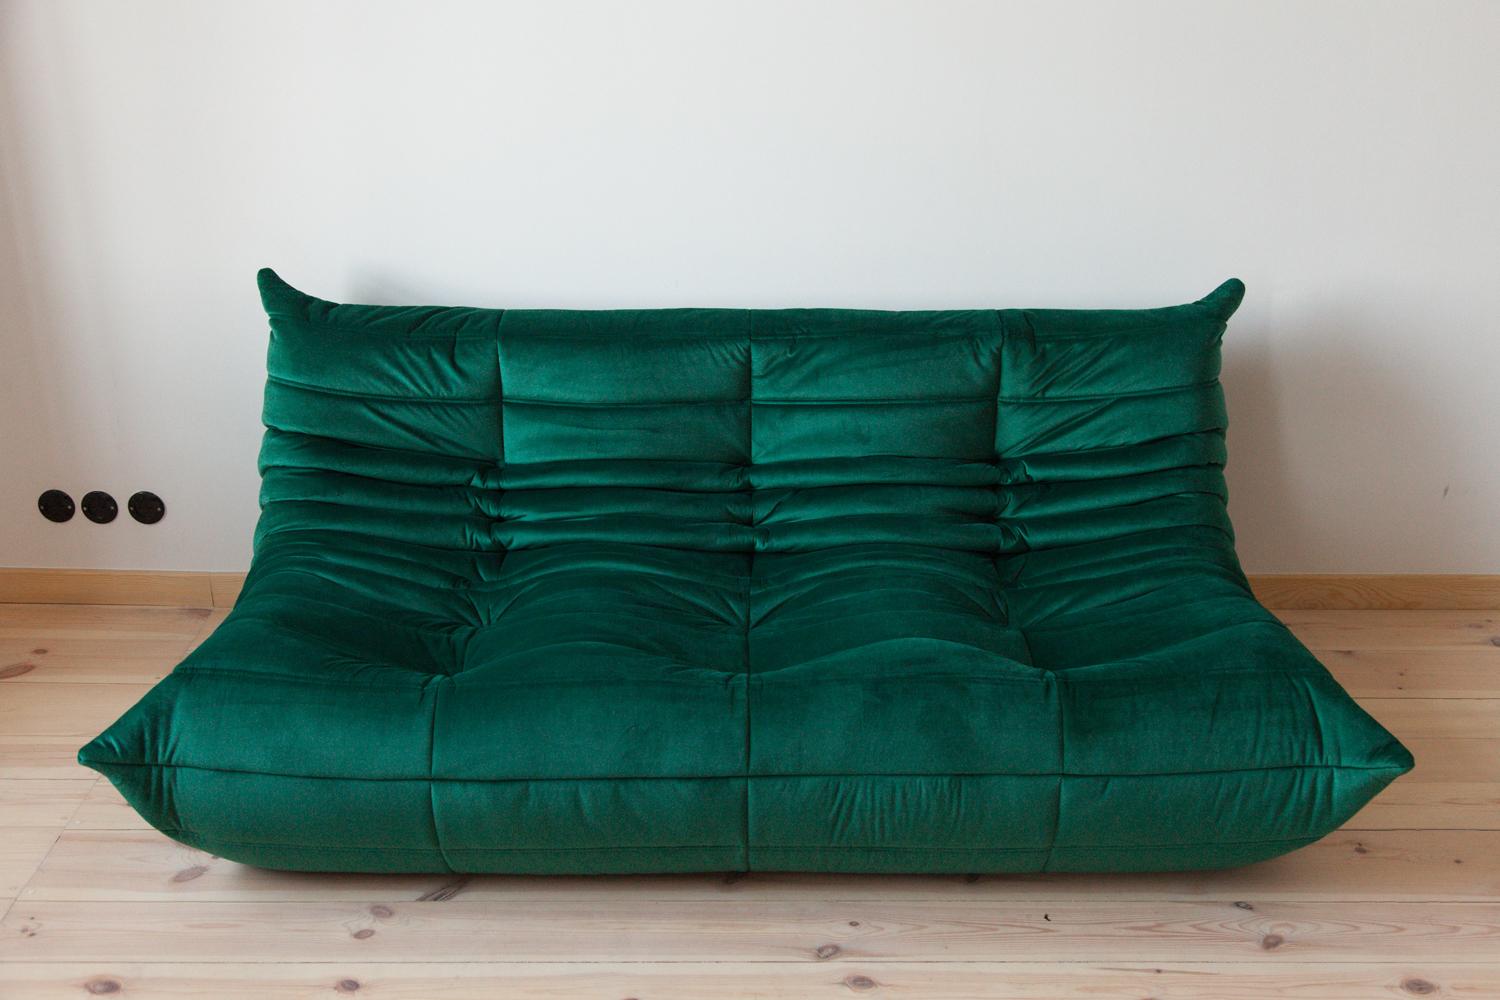 This Togo three-seat sofa was designed by Michel Ducaroy in 1973 and was manufactured by Ligne Roset in France. It has been reupholstered in new bottle green velvet (70 x 174 x 102 cm). It has the original Ligne Roset logo and genuine Ligne Roset